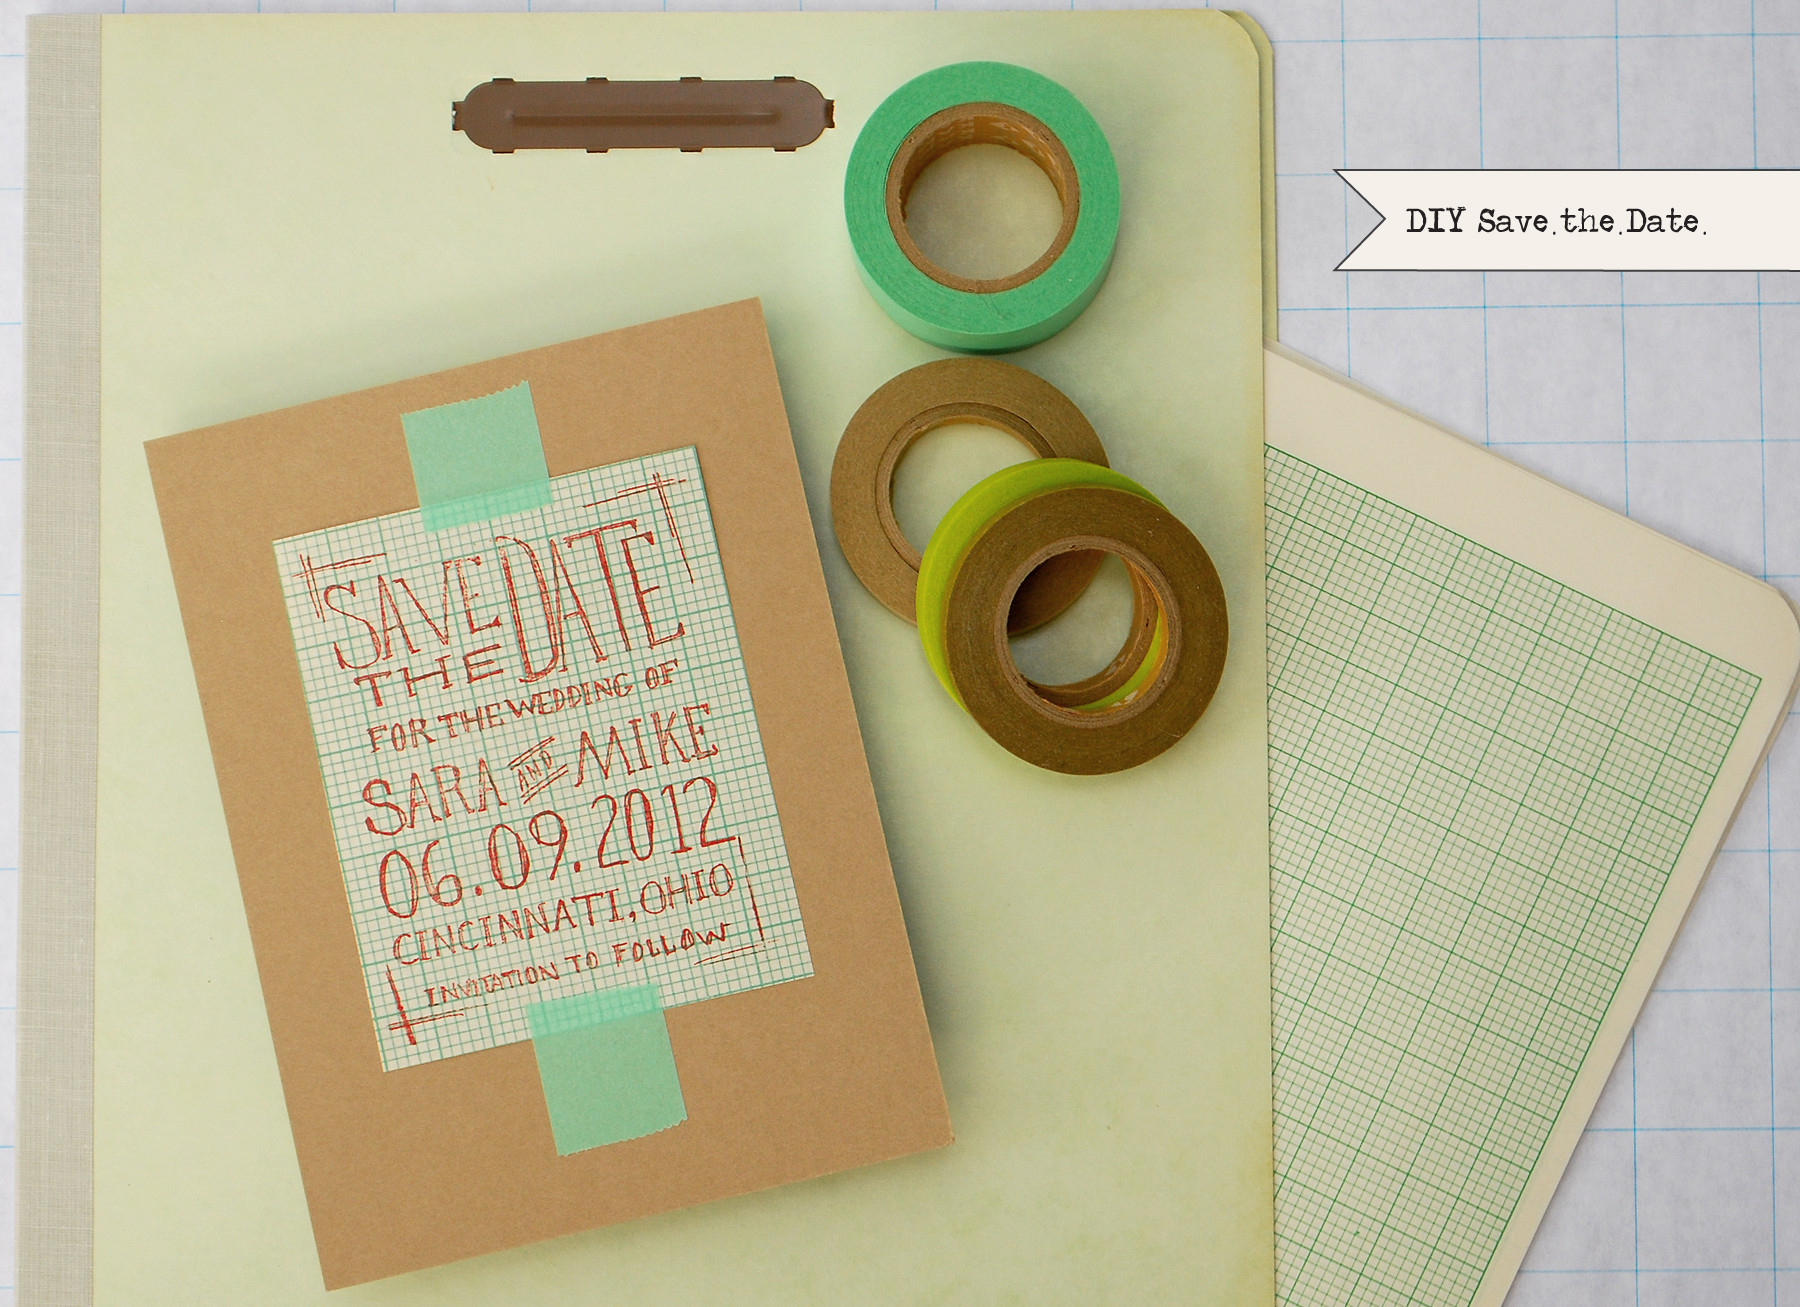 Save The Date Diy
 DIY Geek Chic Graph Paper Save the Dates